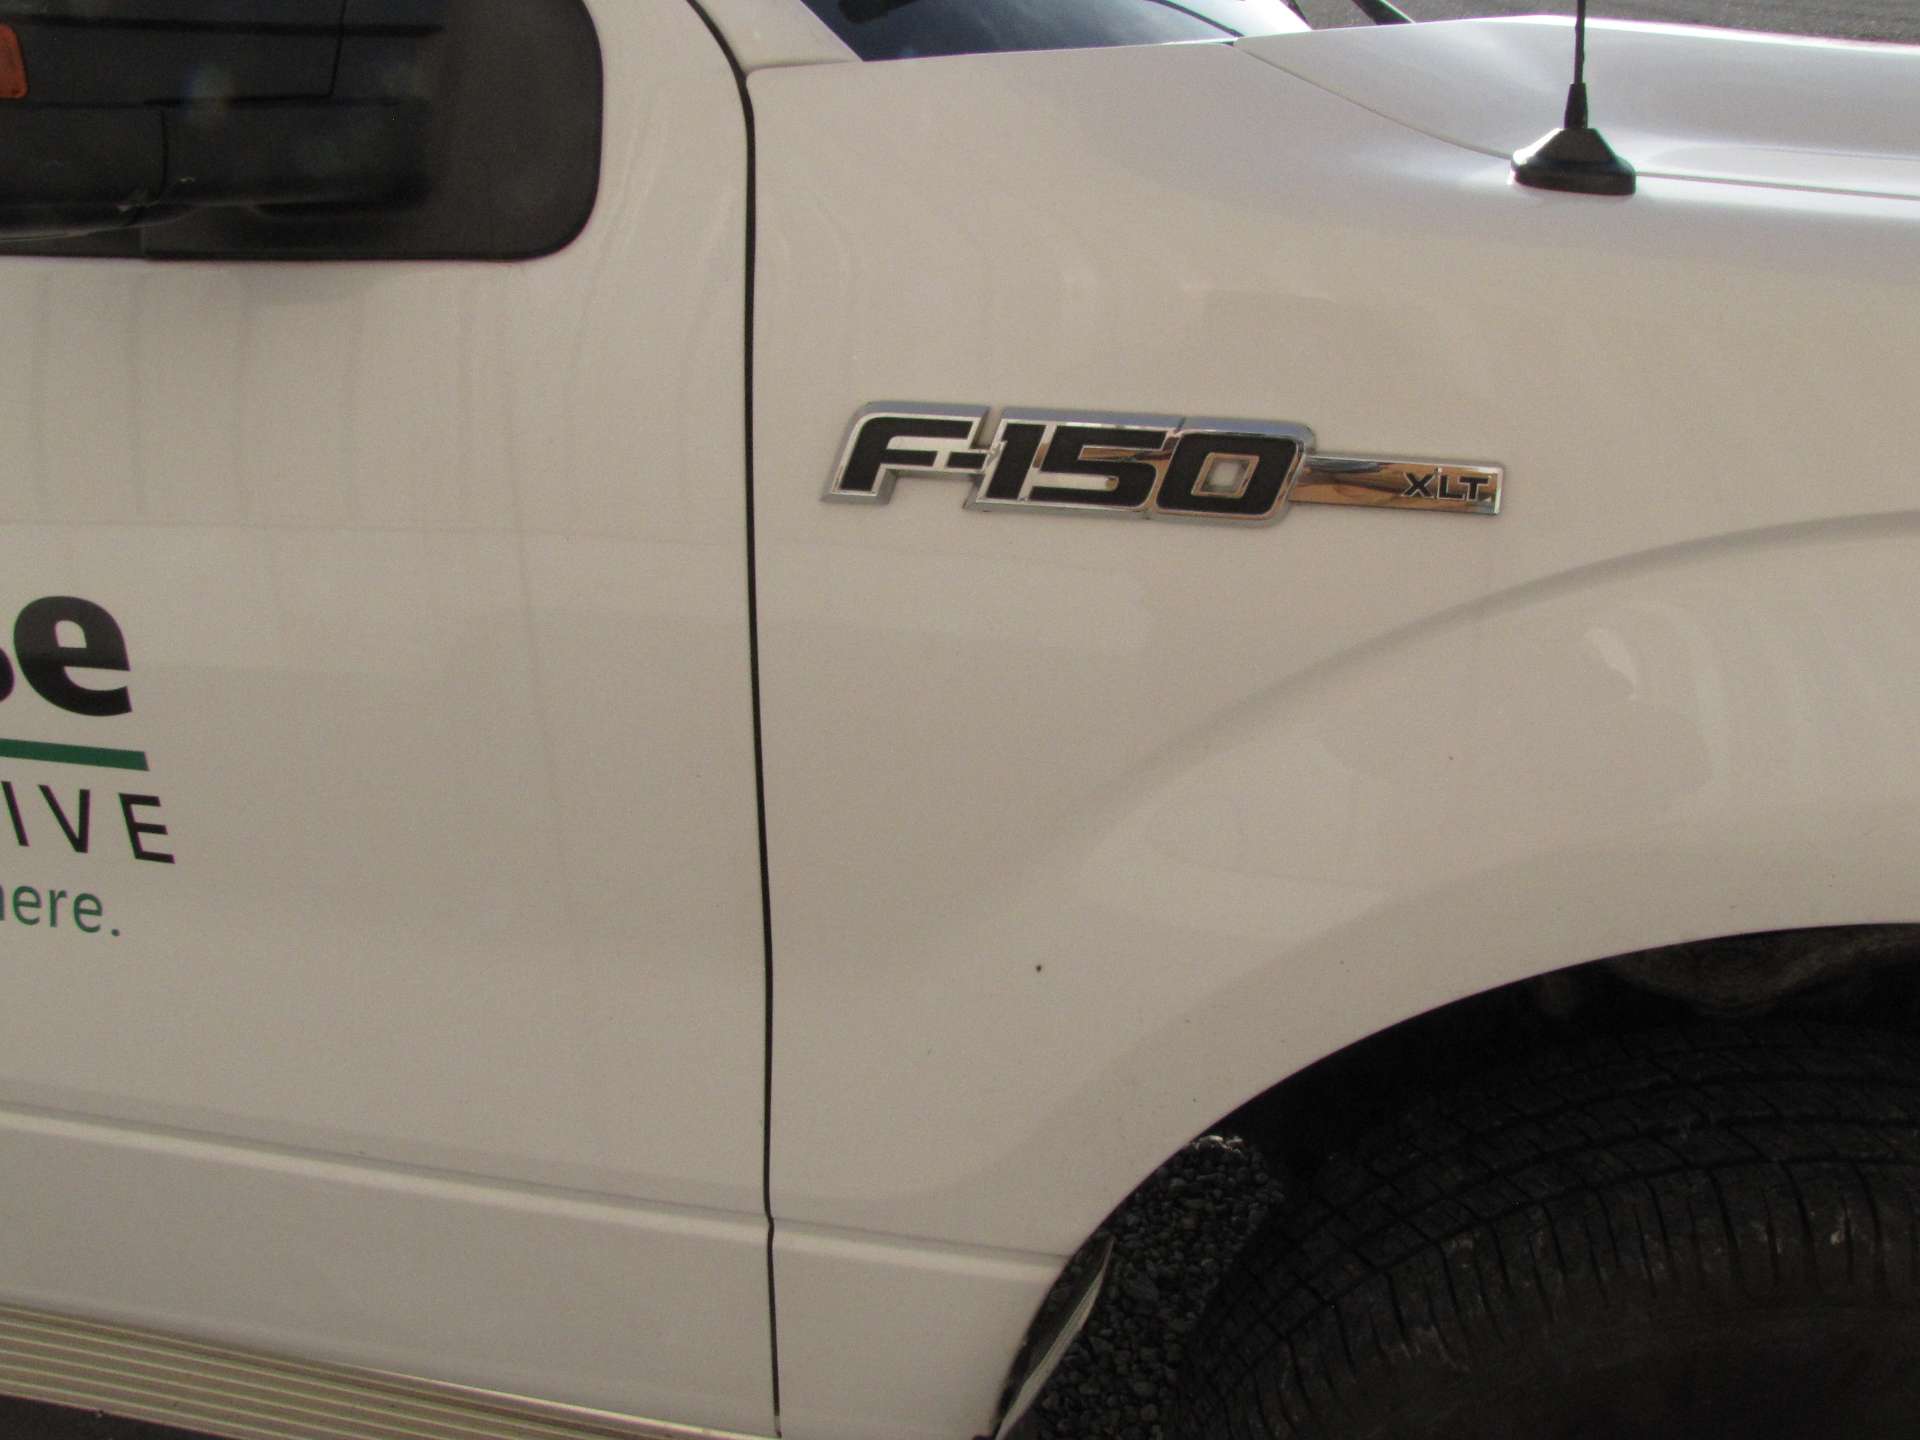 2014 Ford F-150 XLT pickup truck - Image 44 of 68